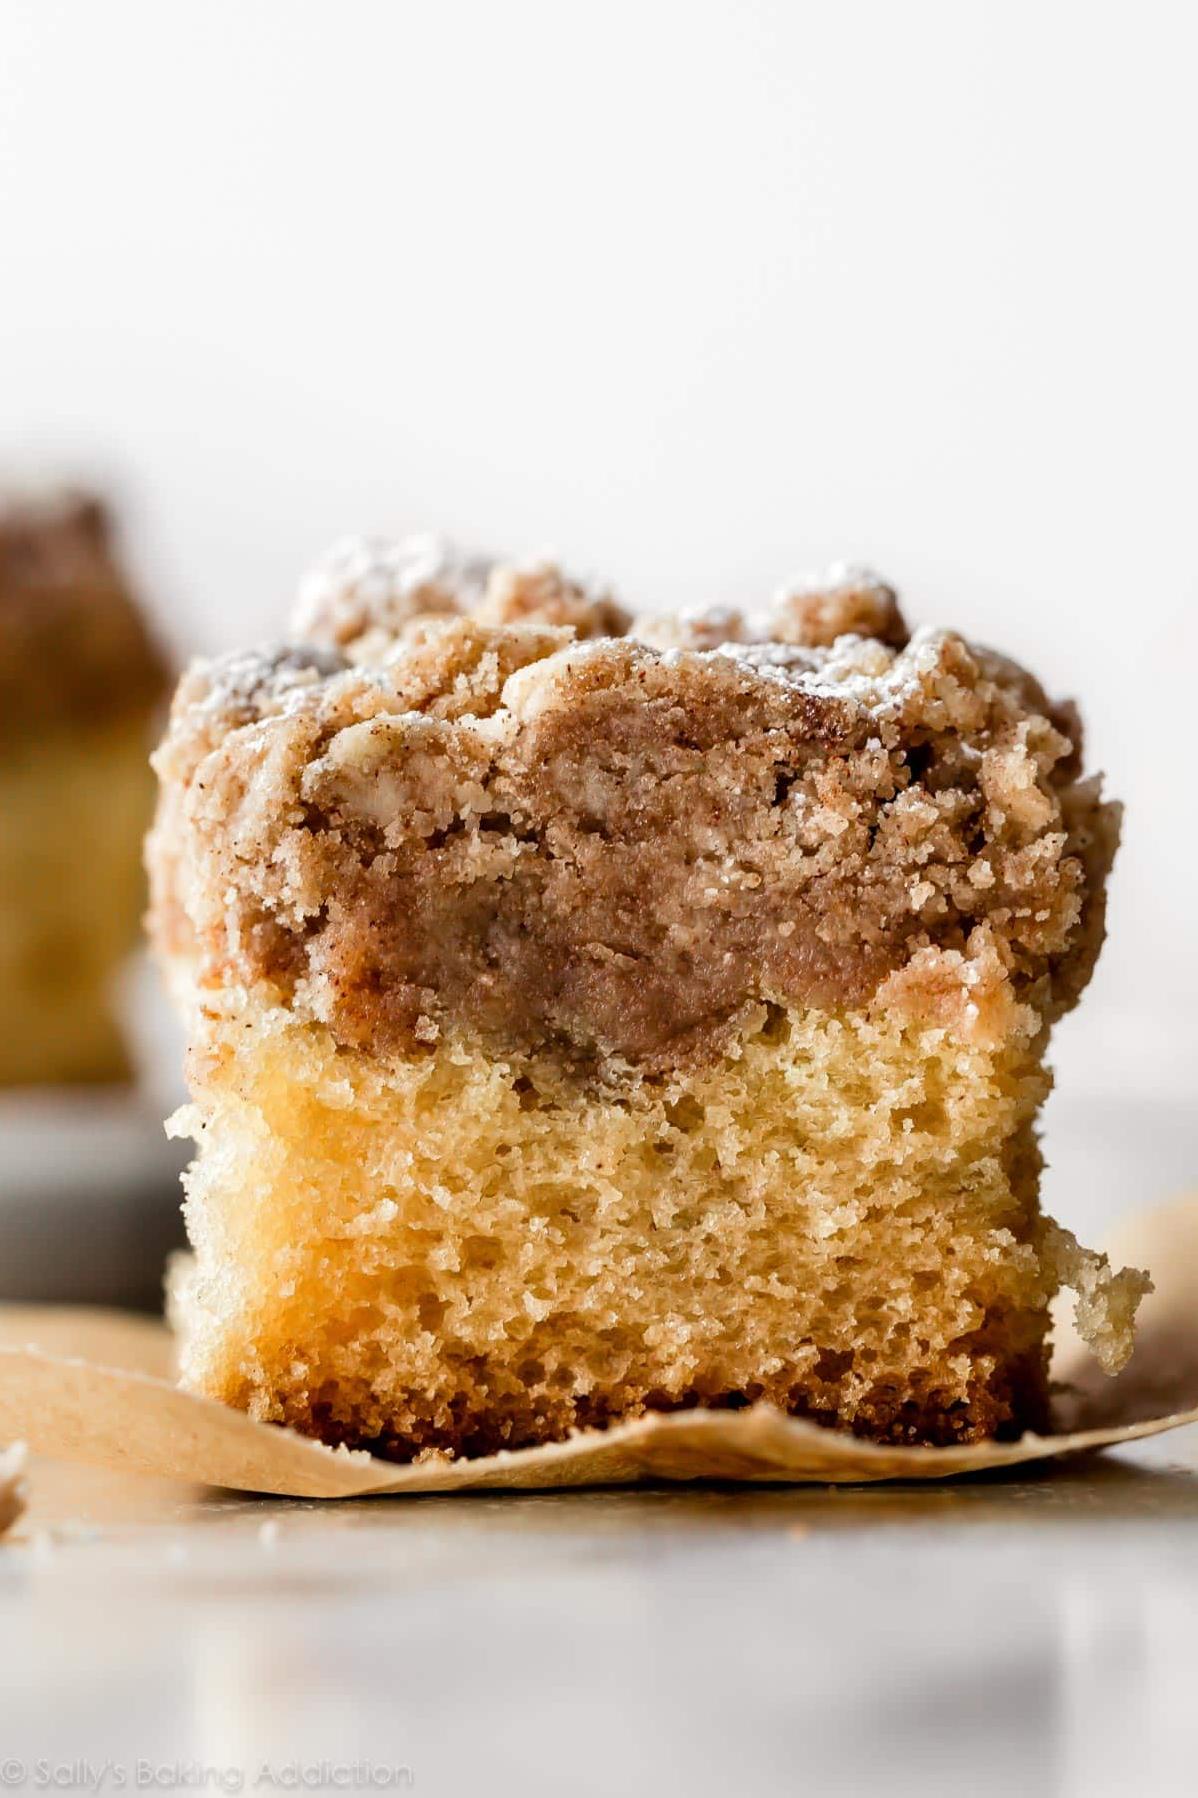  Don't settle for plain old cake - this crumb topping is the perfect addition to any recipe.